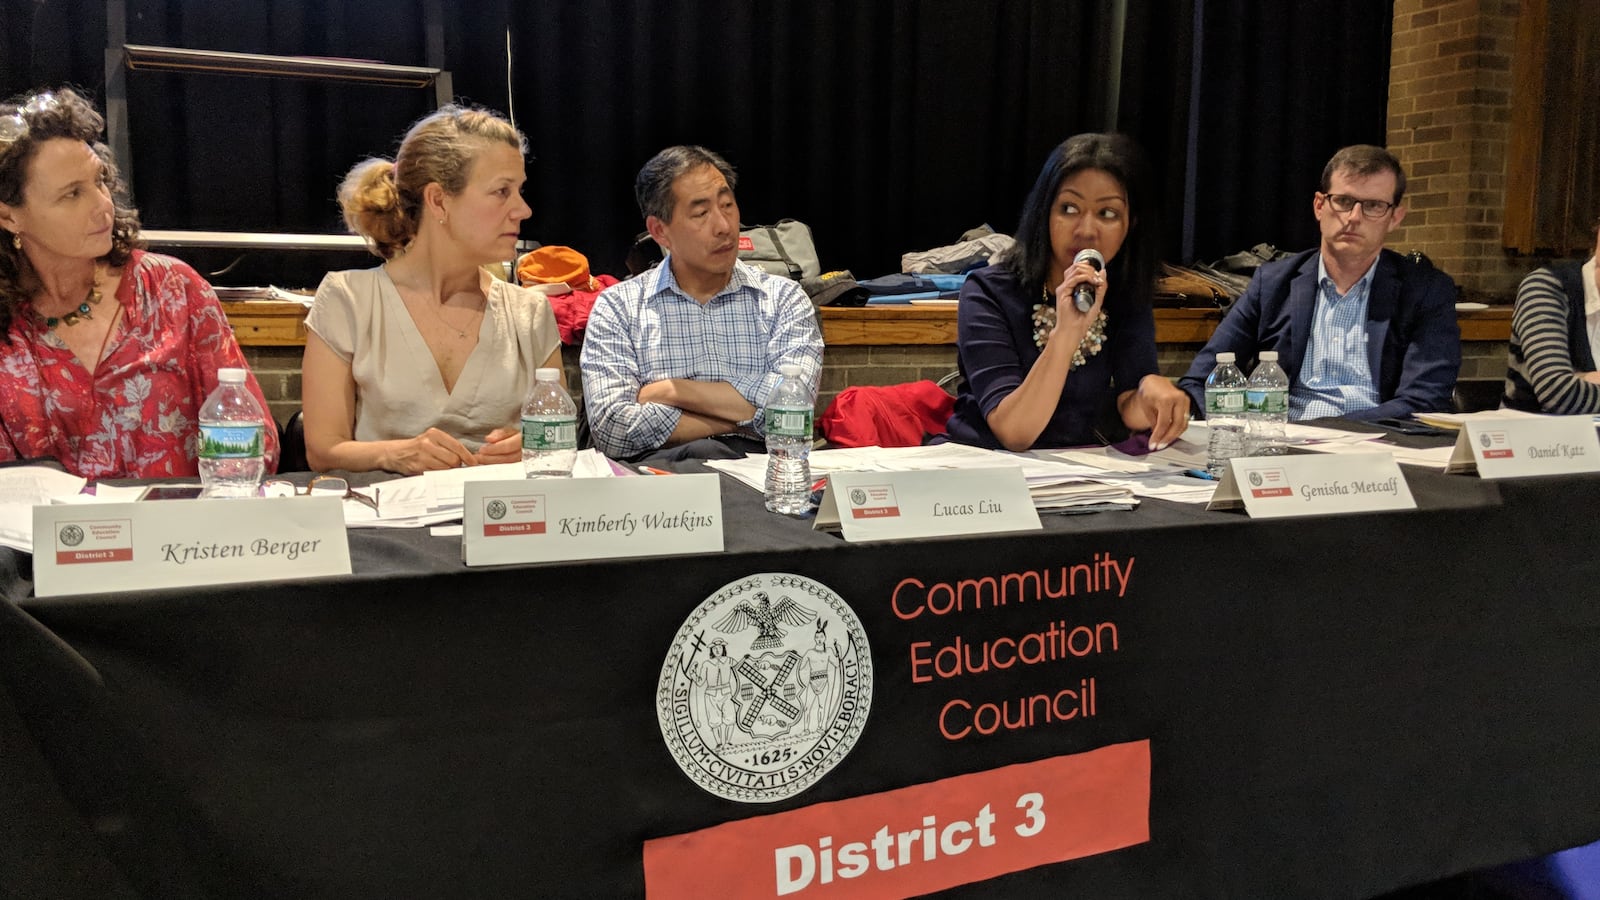 CEC member Genisha Metcalf speaks at Wednesday’s hearing on a proposal to desegregate Manhattan’s west side middle schools.